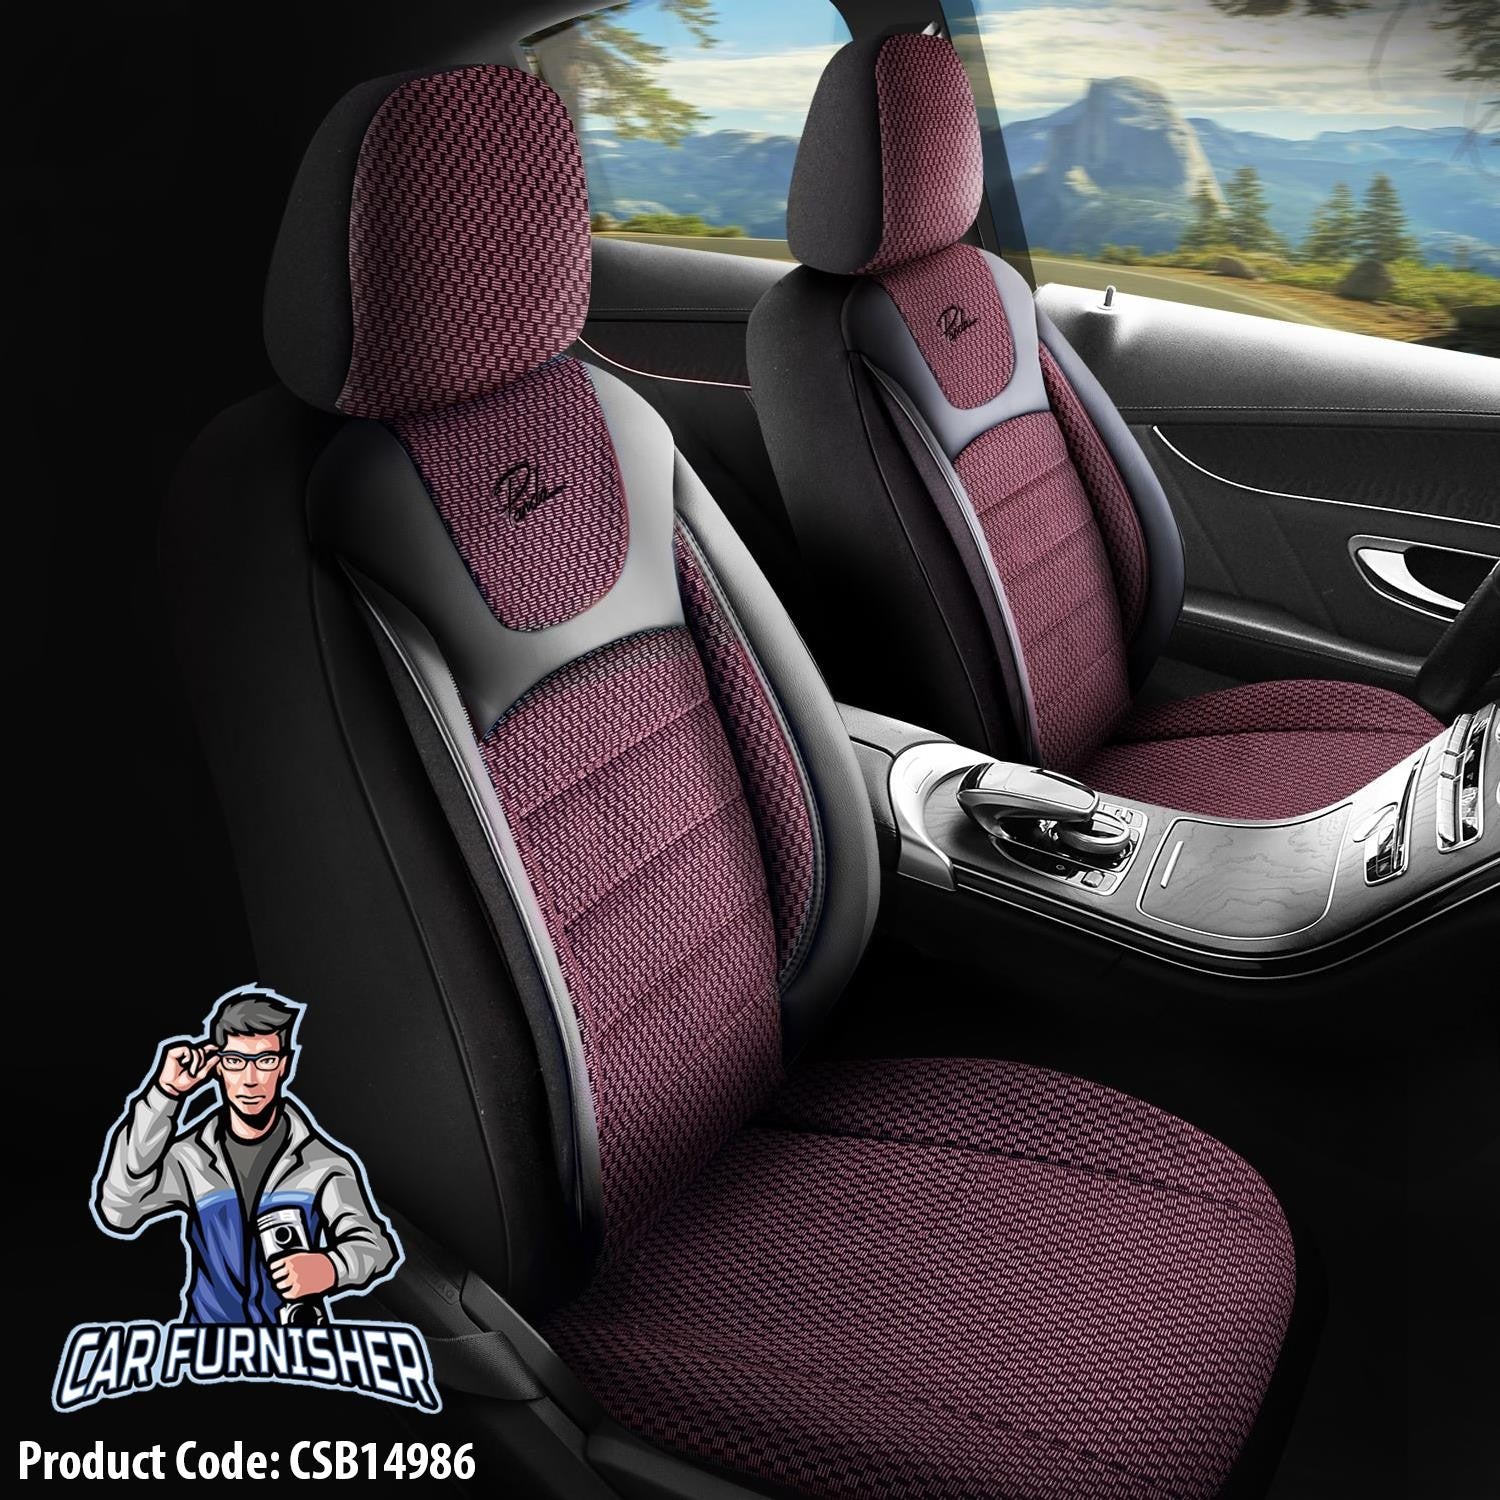 Luxury Car Seat Cover Set (5 Colors) | Prestige Series Burgundy Leather & Fabric